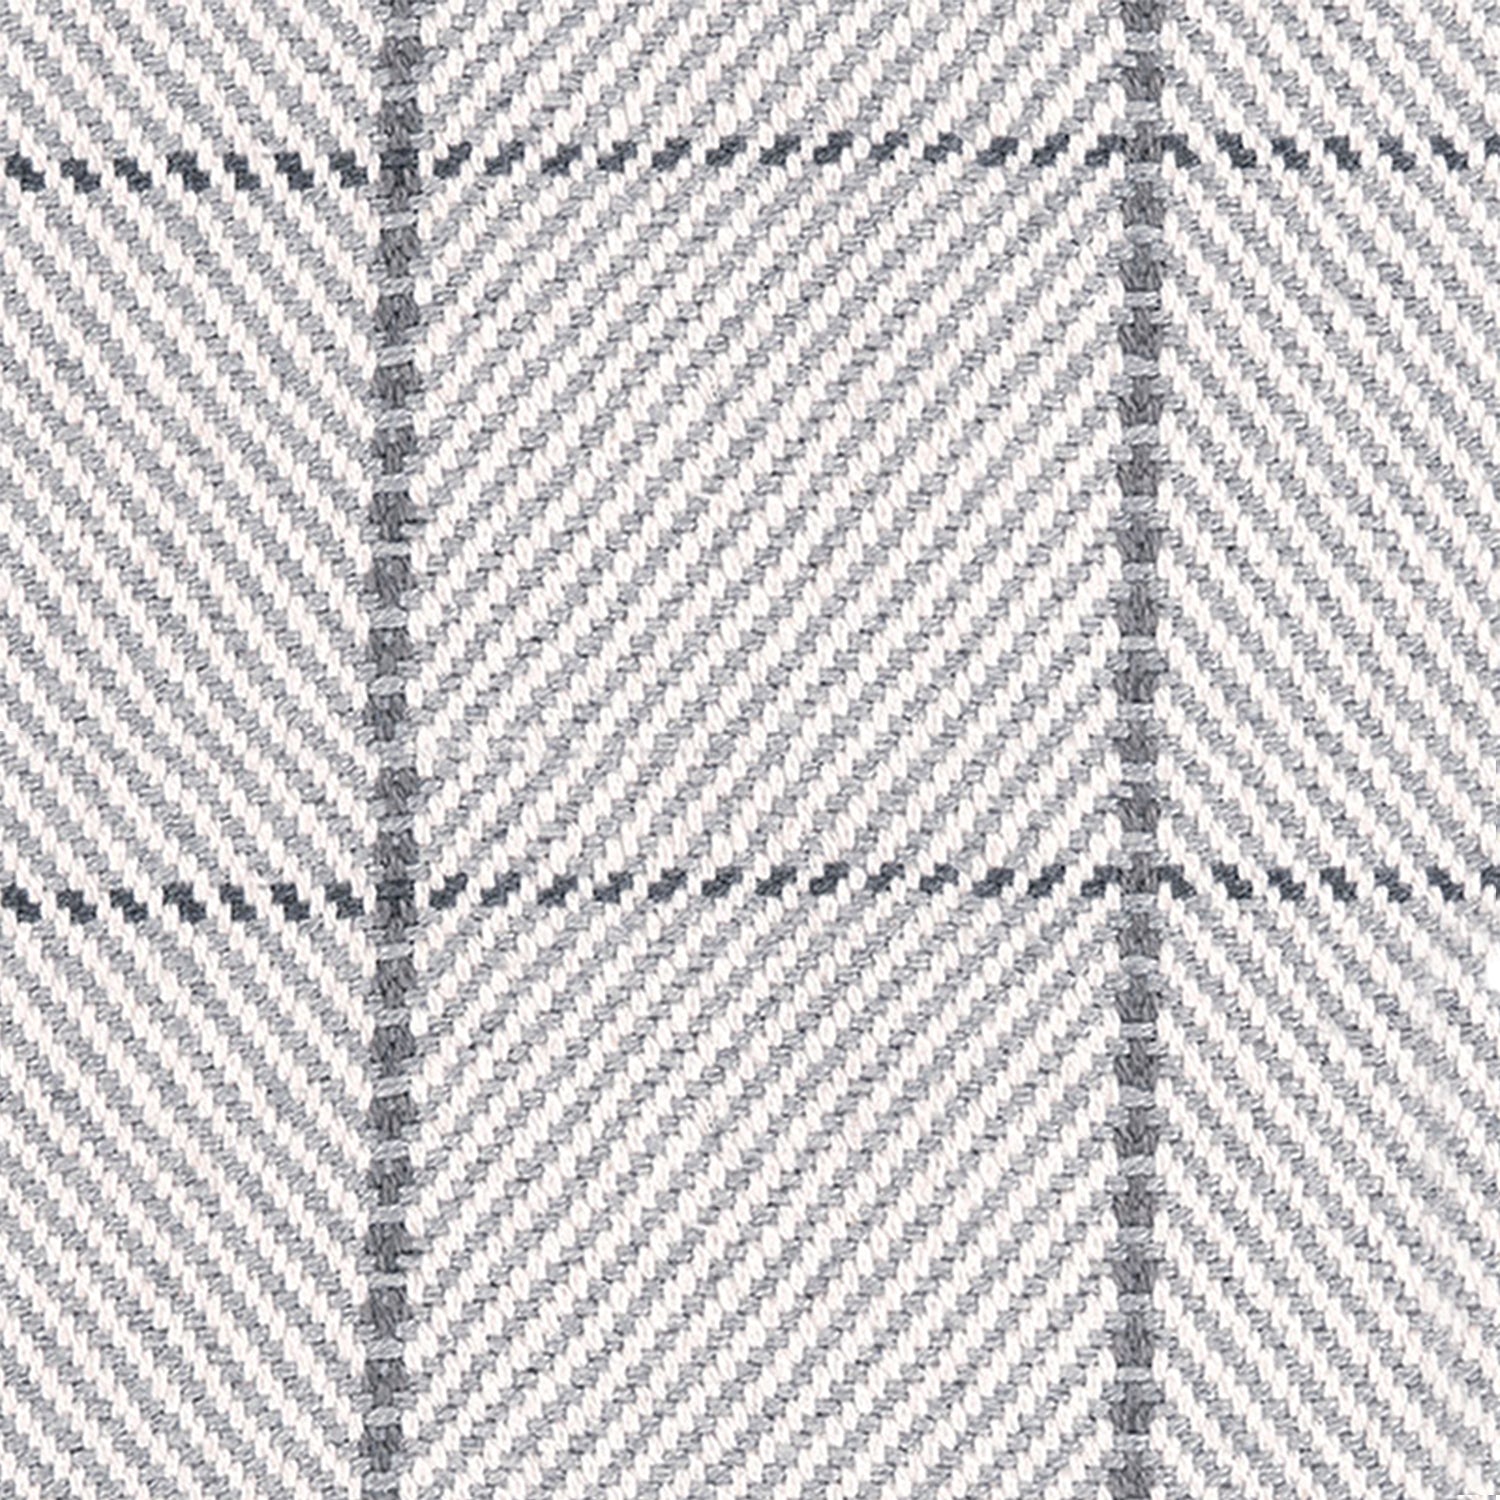 Outdoor broadloom carpet swatch in a plaid weave in shades of white, charcoal and gray.